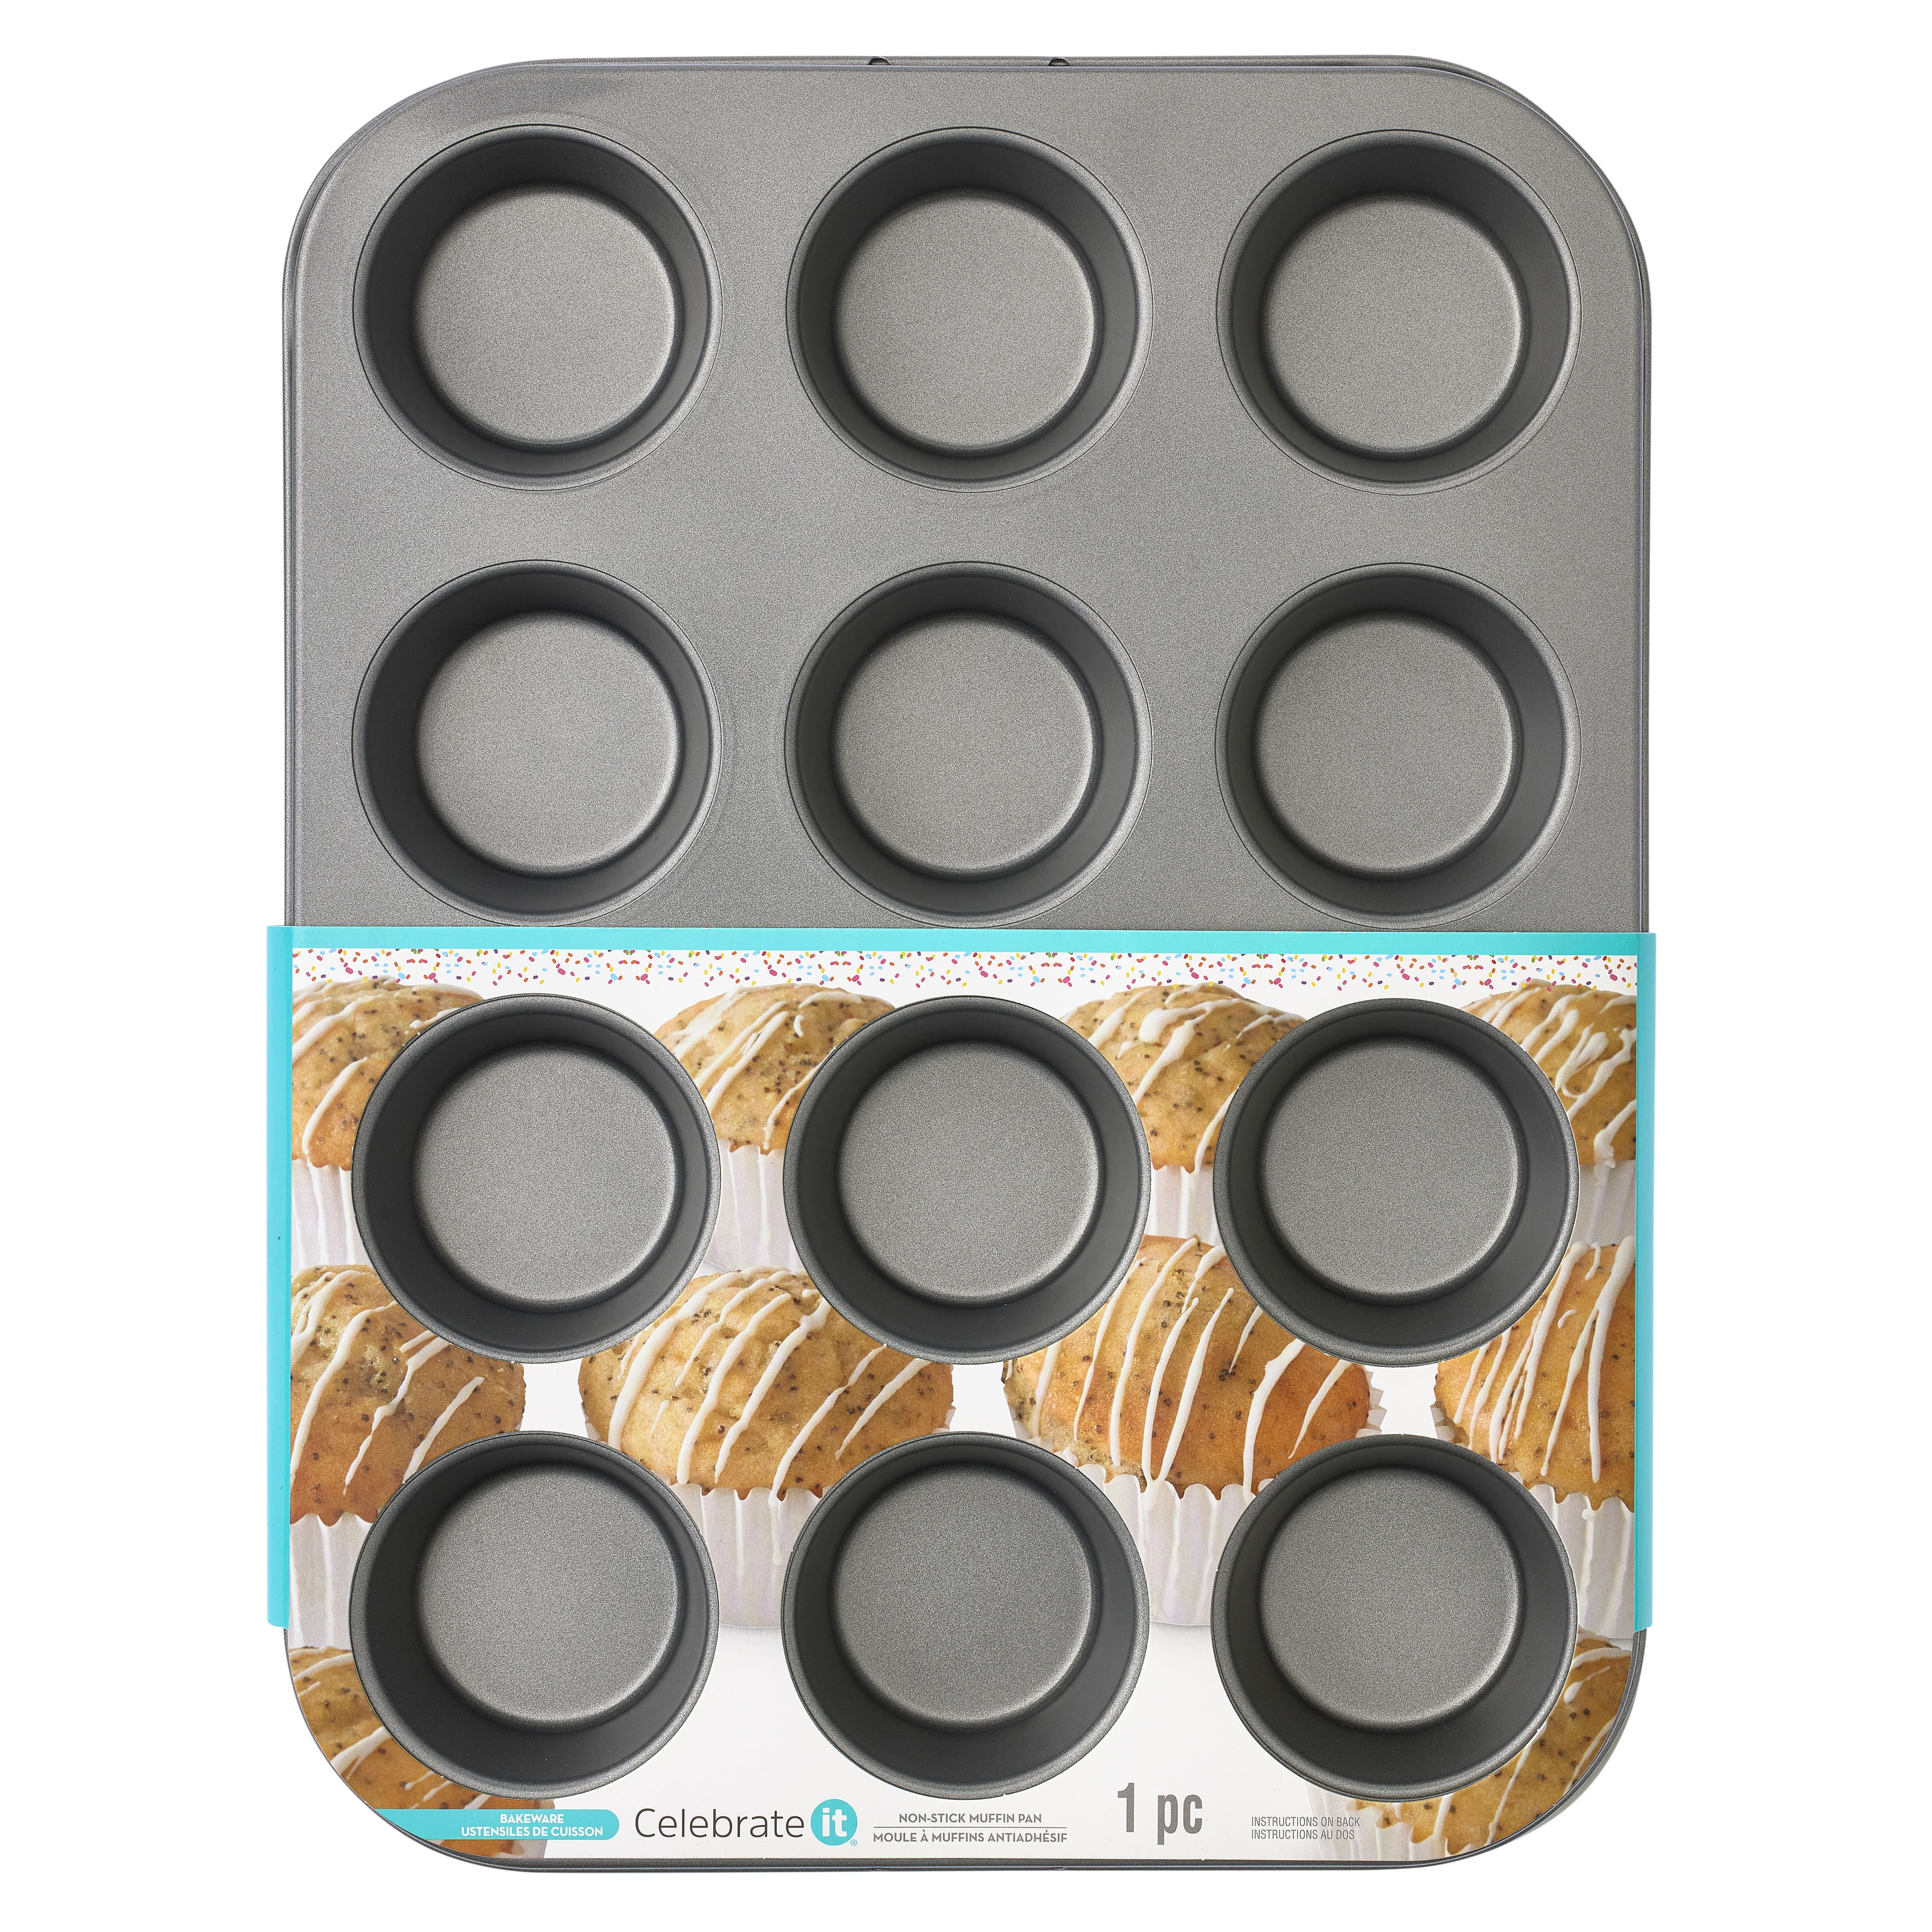 So many different ways to use the 12 cup muffin pan! - What do you